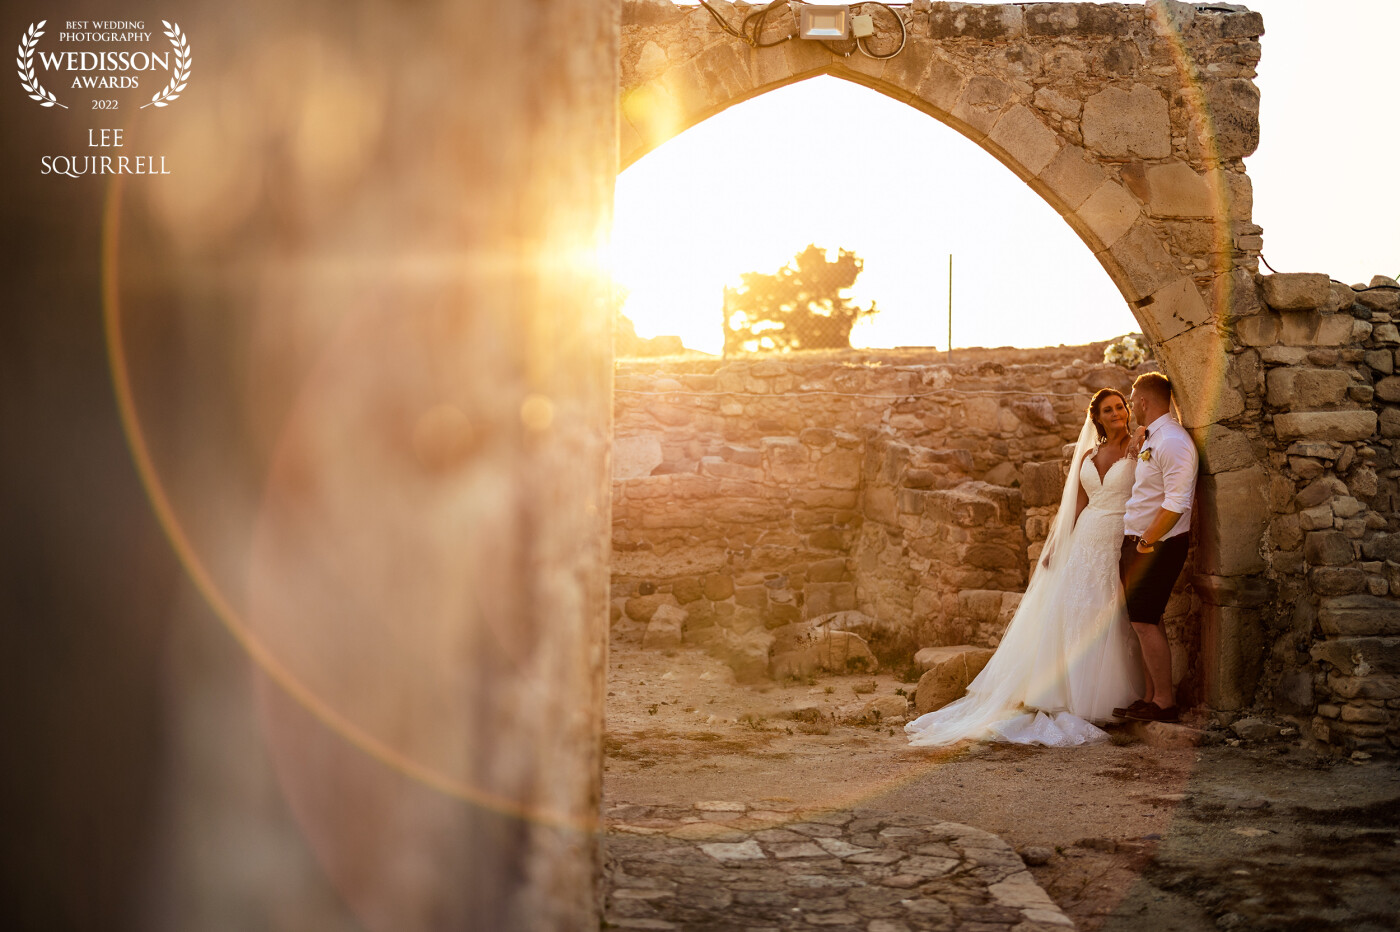 Gareth and Claire finally had their day after a number of postponements due to covid and this image was captured at sunset at the beautiful 12th Century Church Panagia Odigitria, in the village of Kouklia Just 15 minutes from the vibrant town of Paphos in Cyprus.